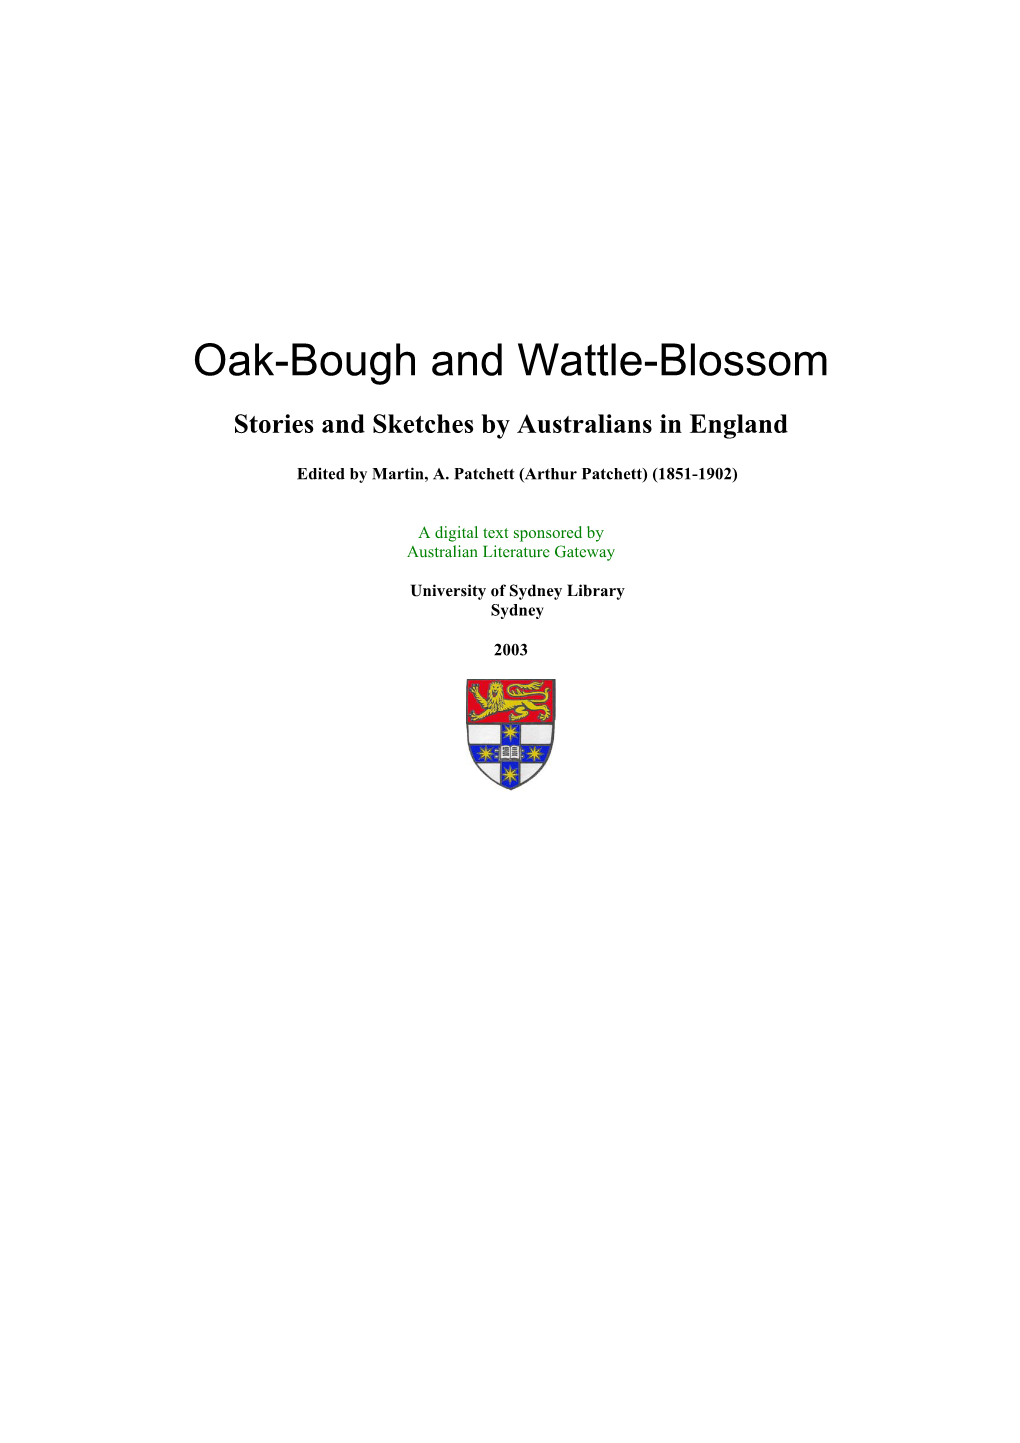 Oak-Bough and Wattle-Blossom Stories and Sketches by Australians in England